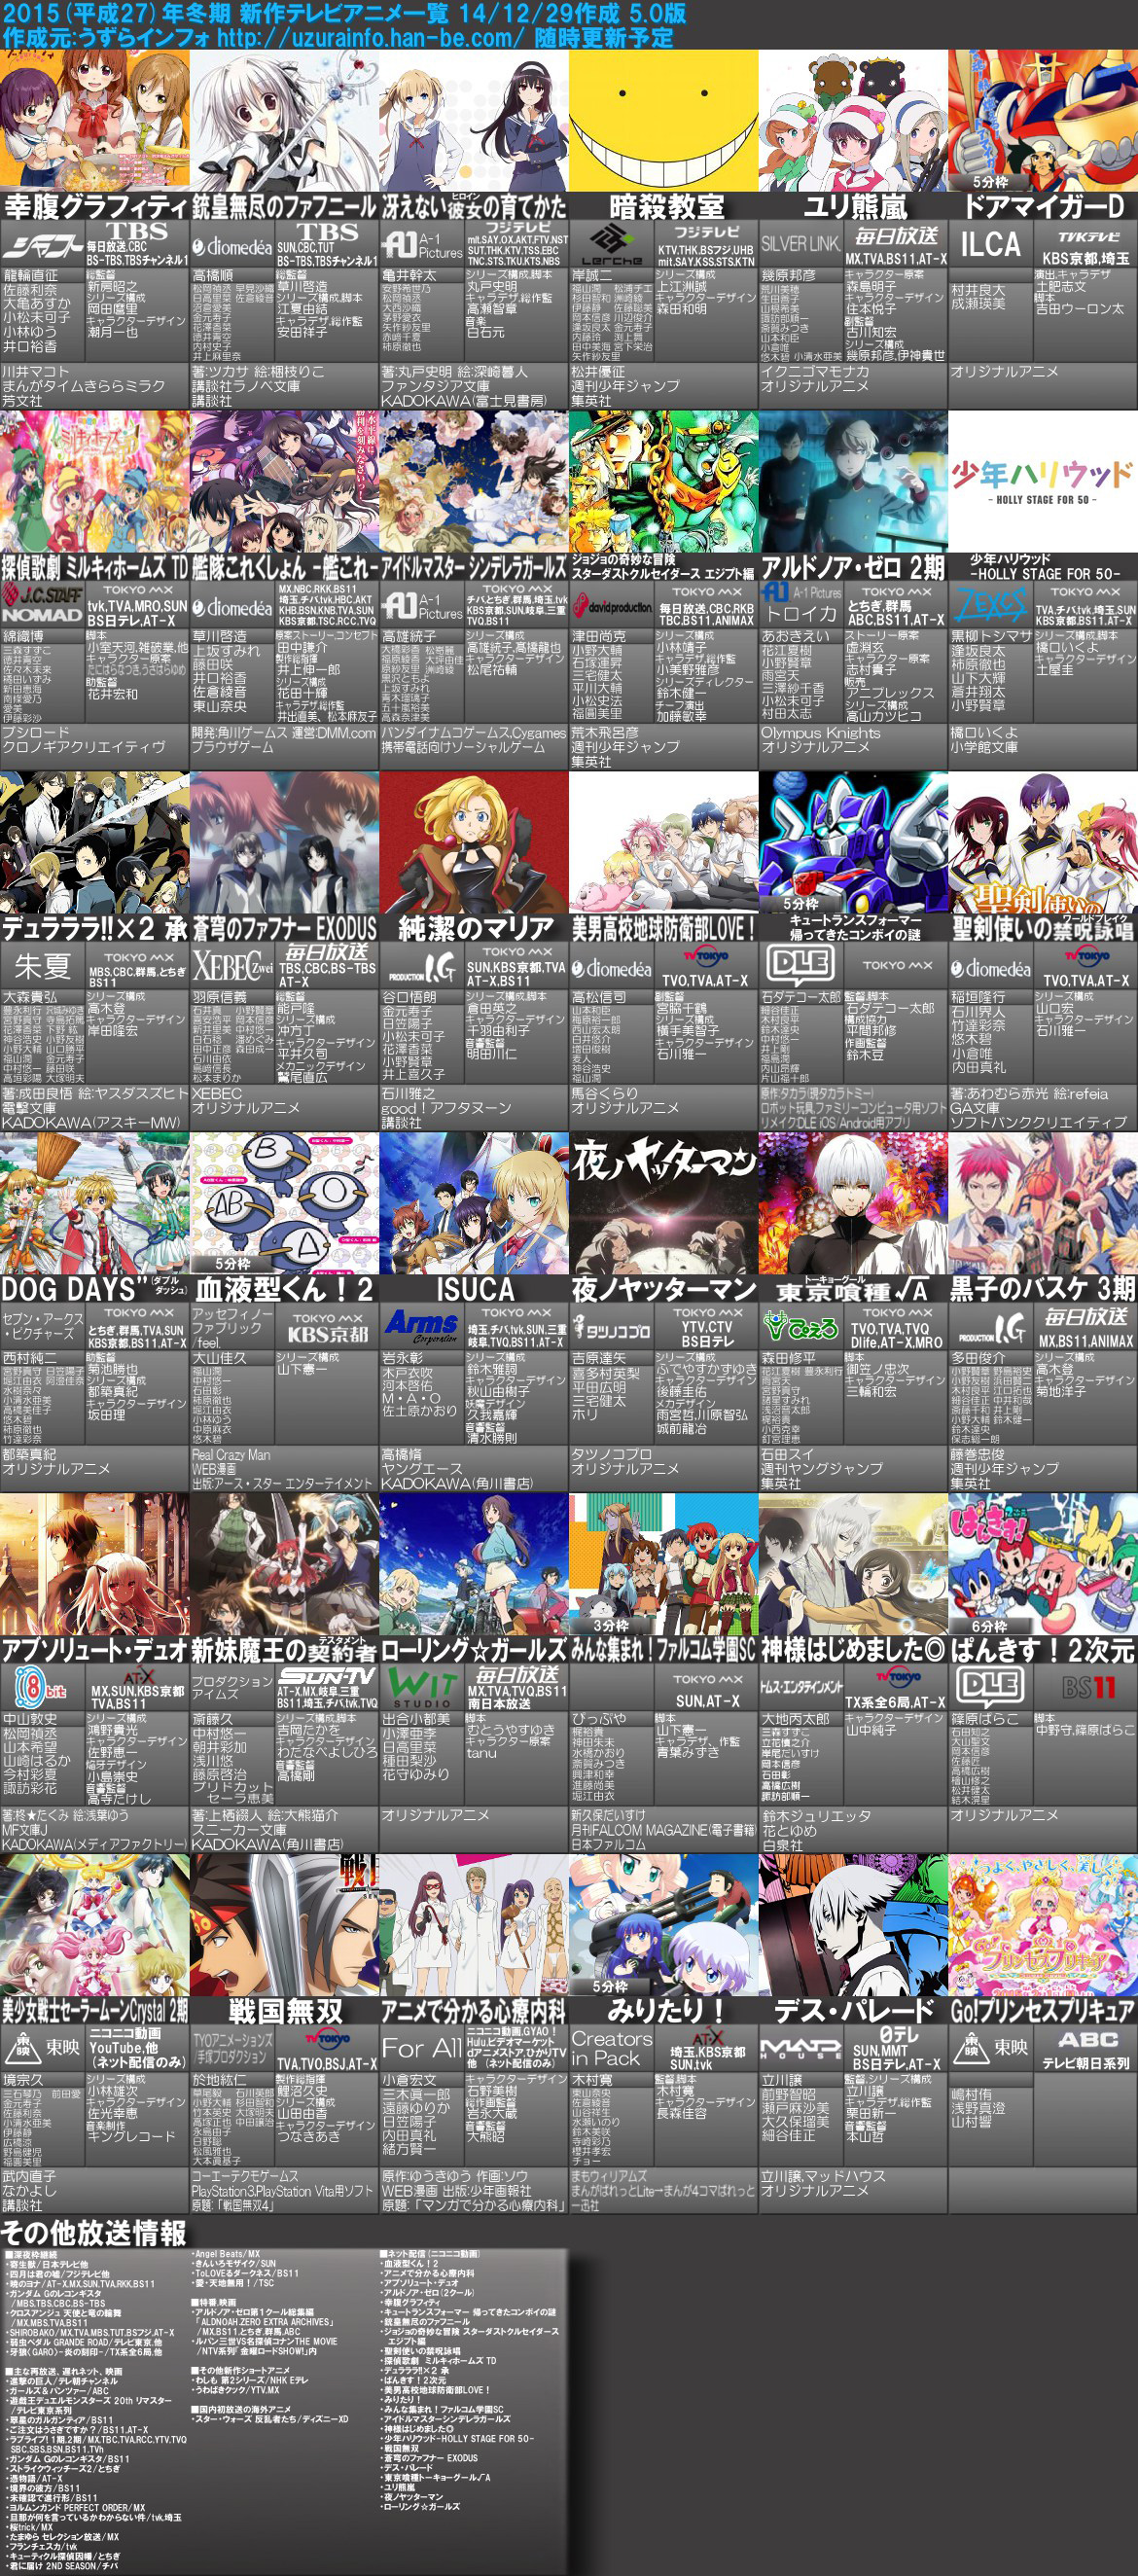 Winter-2014-2015-Anime-Broadcast-Guide-Image